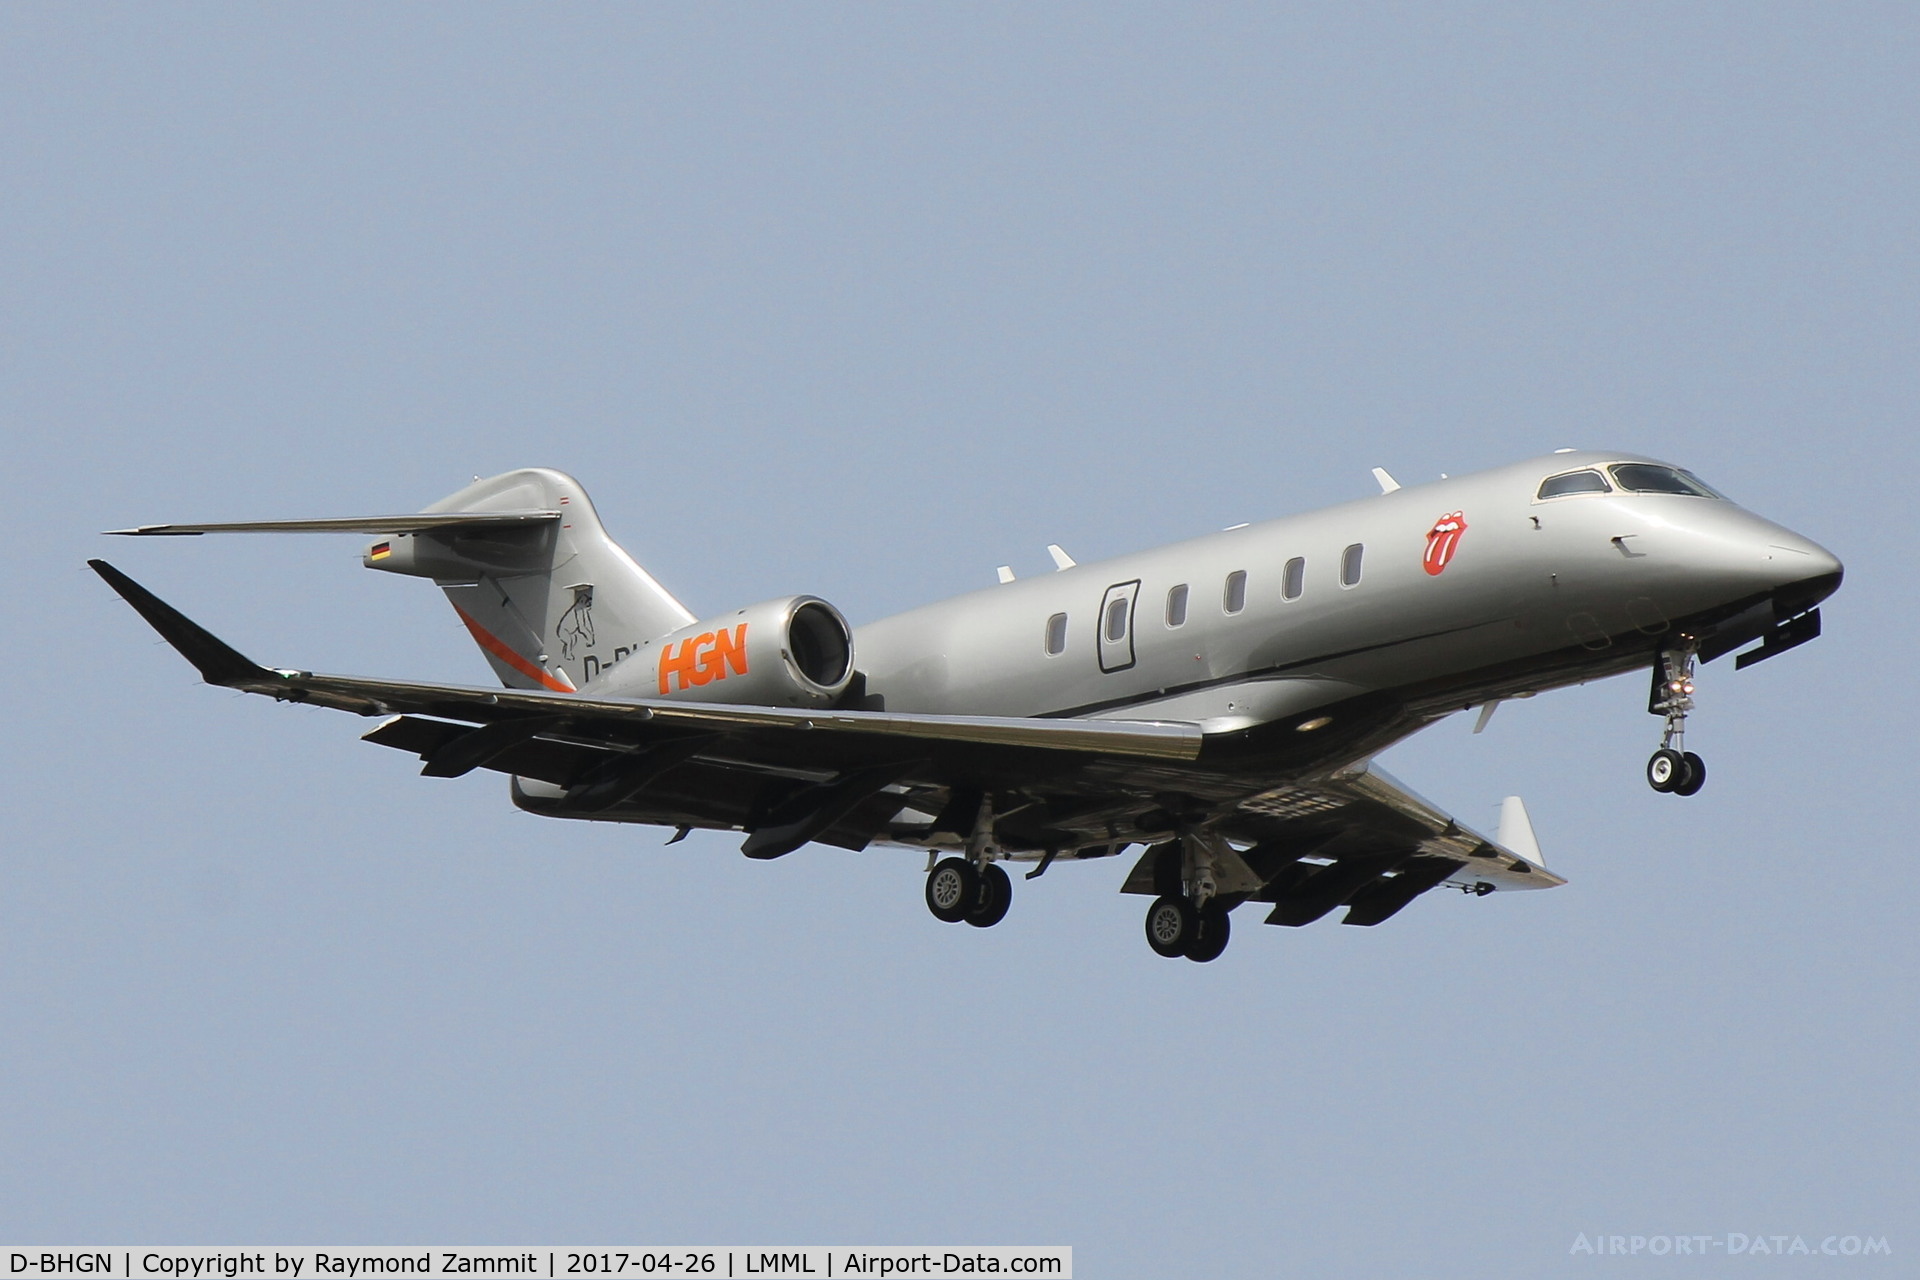 D-BHGN, 2015 Bombardier Challenger 350 (BD-100-1A10) C/N 20583, Bombardier Challenger350 D-BHGN Windrose Air